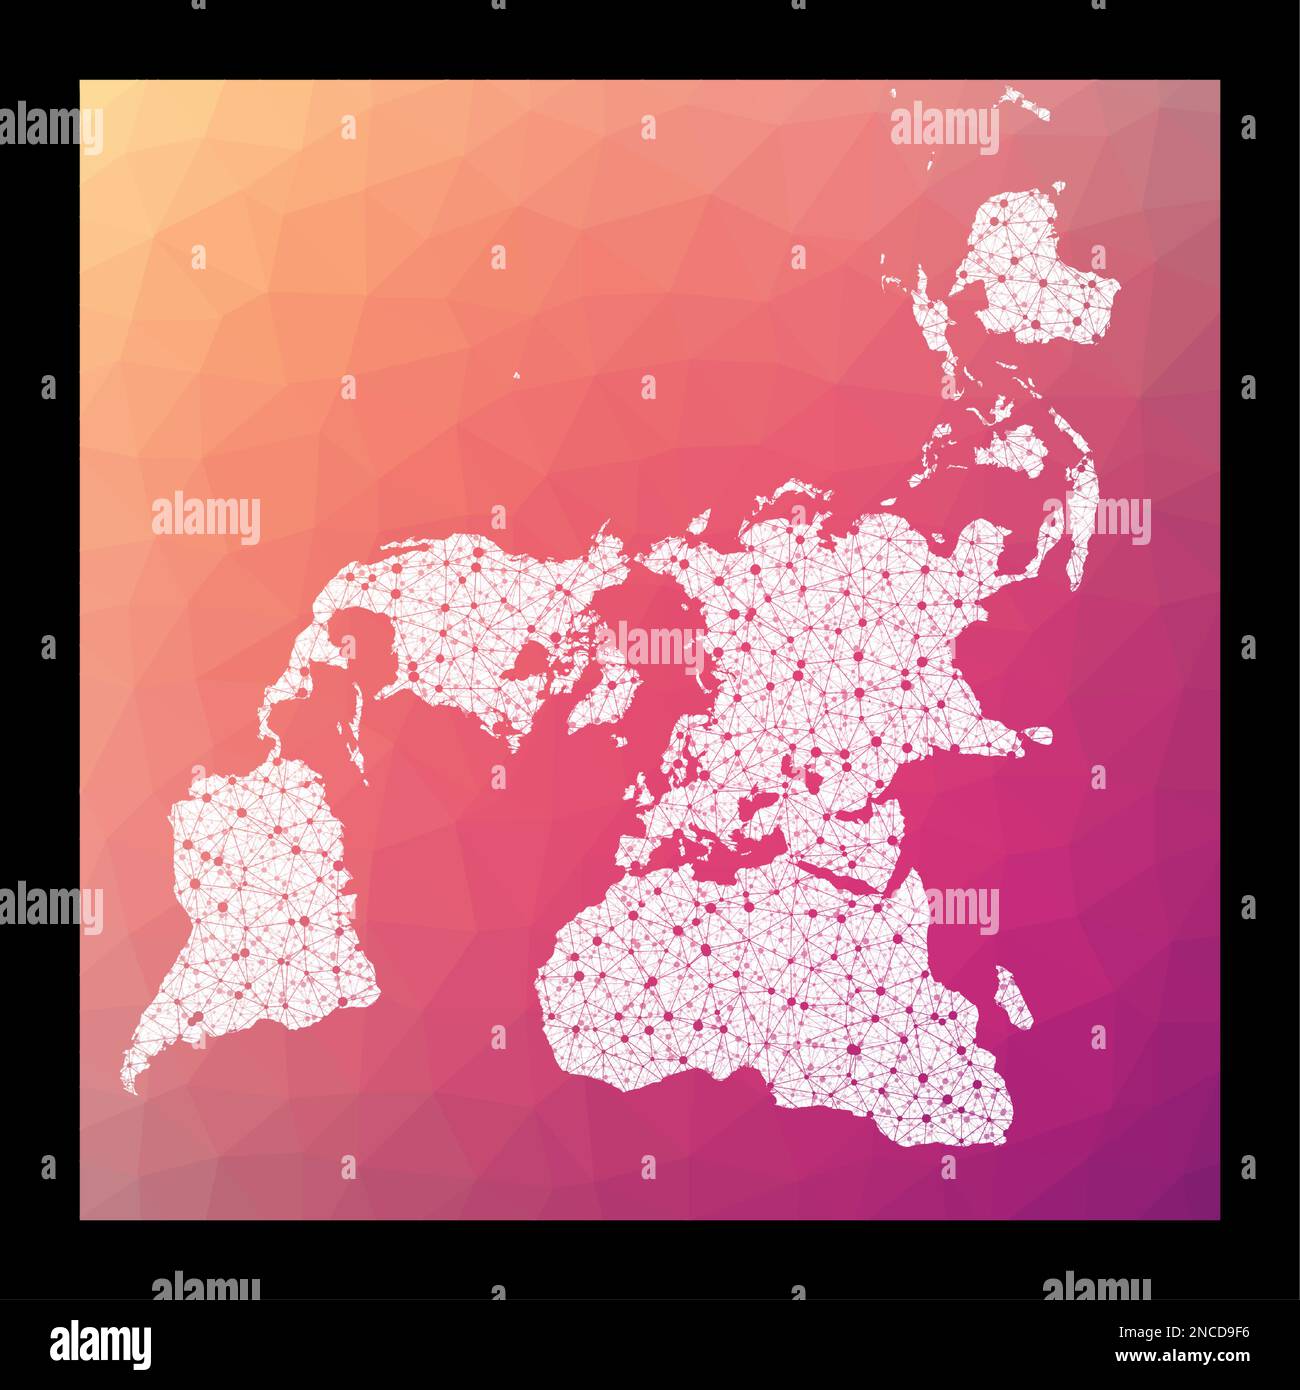 World network map. Peirce quincuncial projection. Wired globe in Peirce Quincuncial projection on geometric low poly background. Modern vector illustr Stock Vector